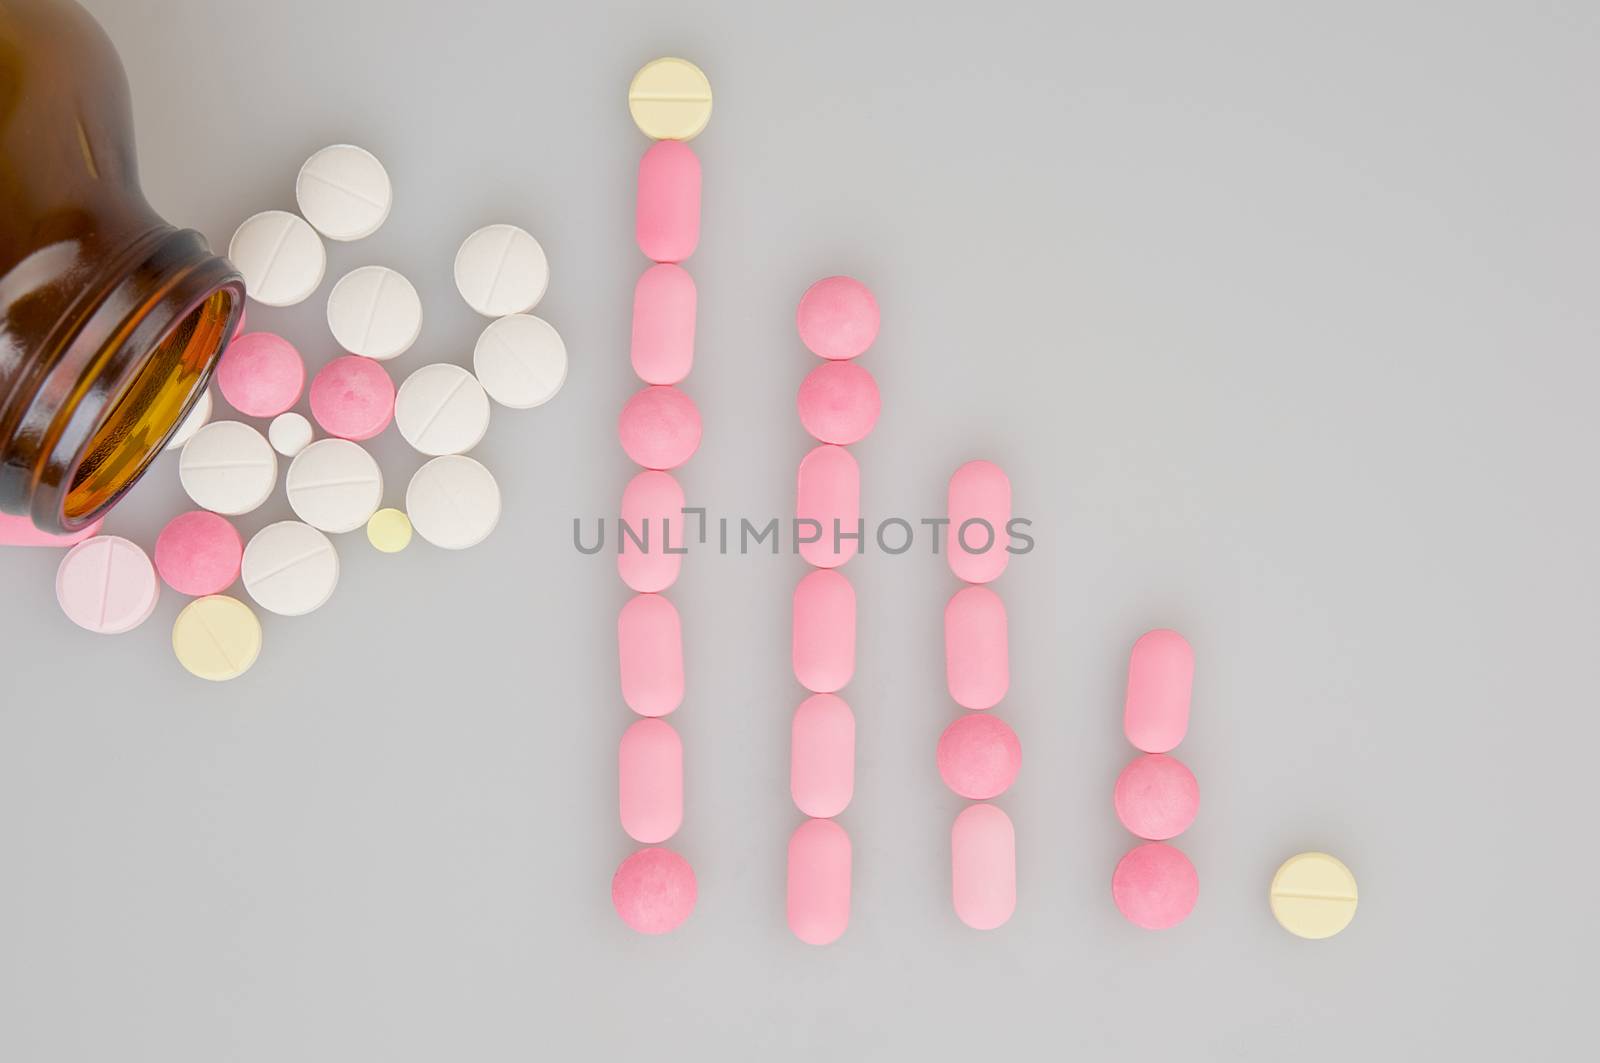 Colorful tablets place as bar graph on white background by eaglesky